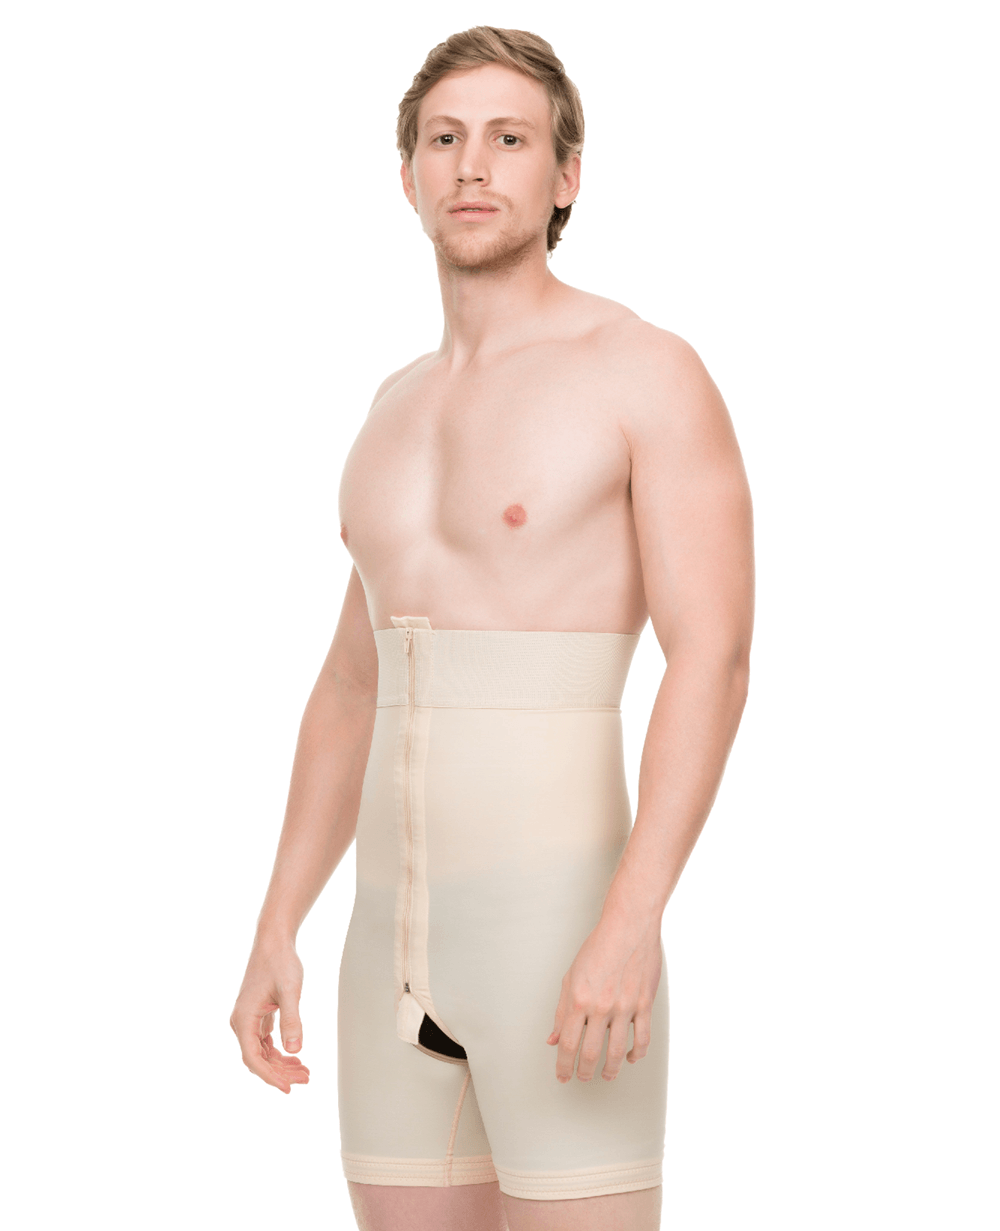 Male High-Waist Abdominal Cosmetic Surgery Compression Girdle Mid Thigh with Zippers (MG09) - Isavela Compression Garments